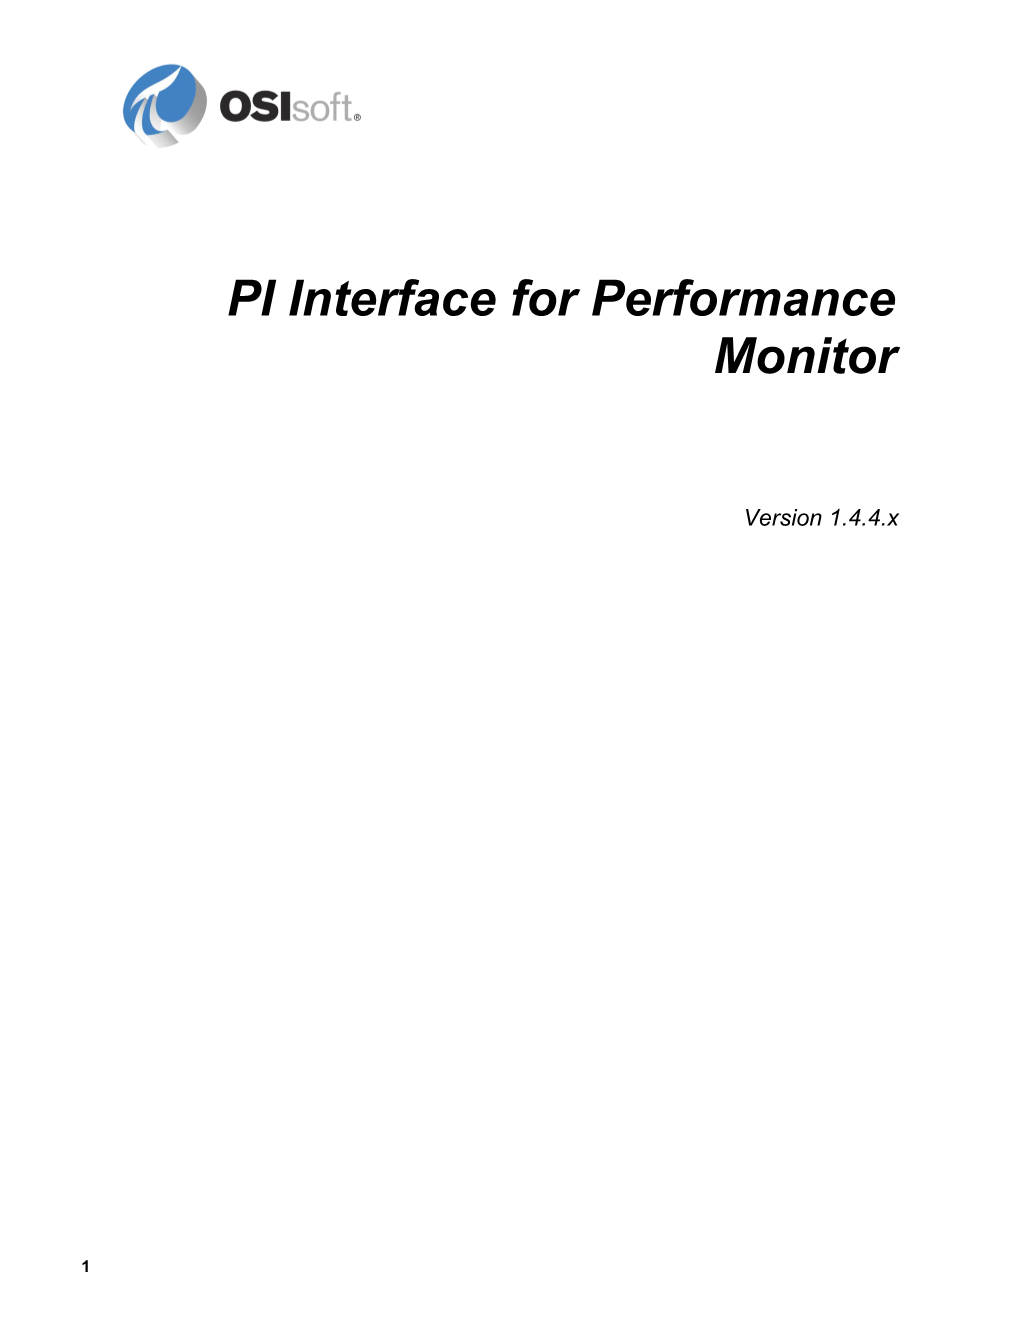 PI Interface for Performance Monitor